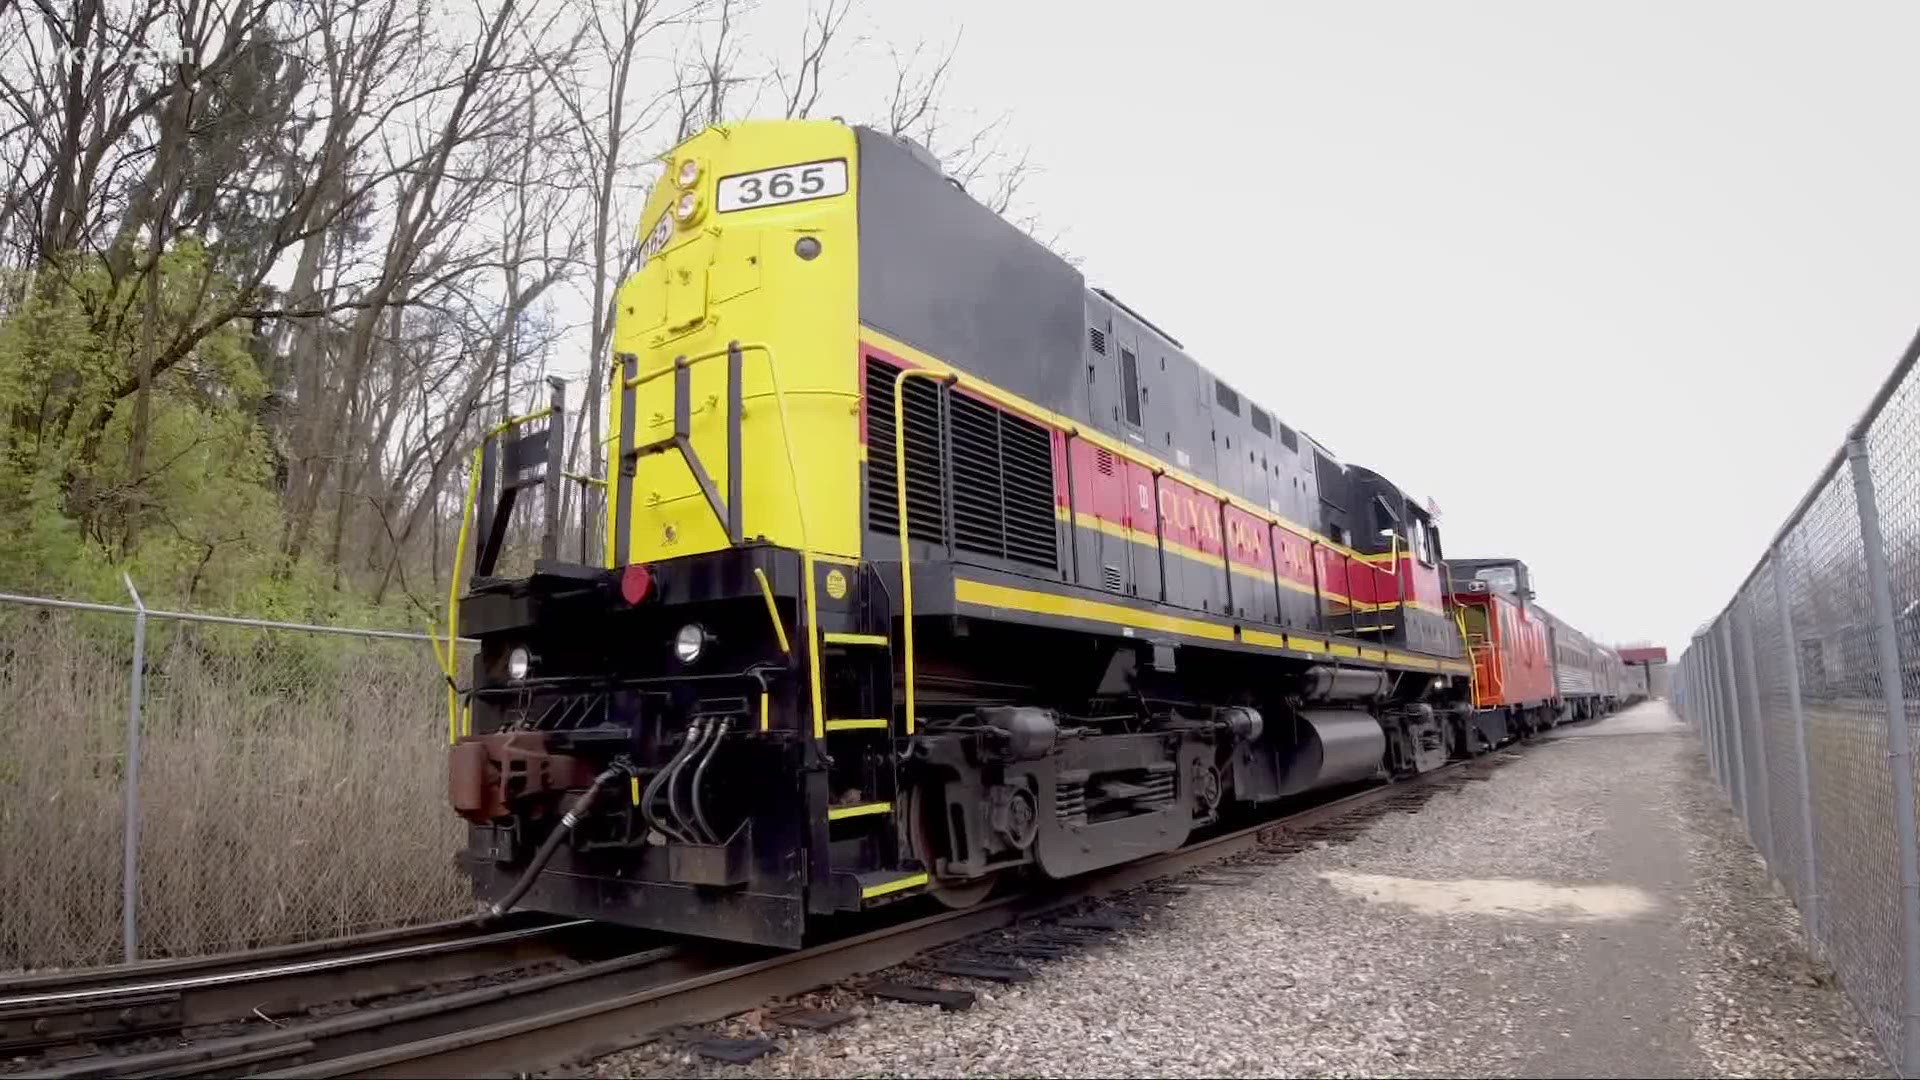 Nov. 27, 2020: We take a peek at the Cuyahoga Valley Scenic Railroad's history despite this year's cancellation of the Polar Express train rides.